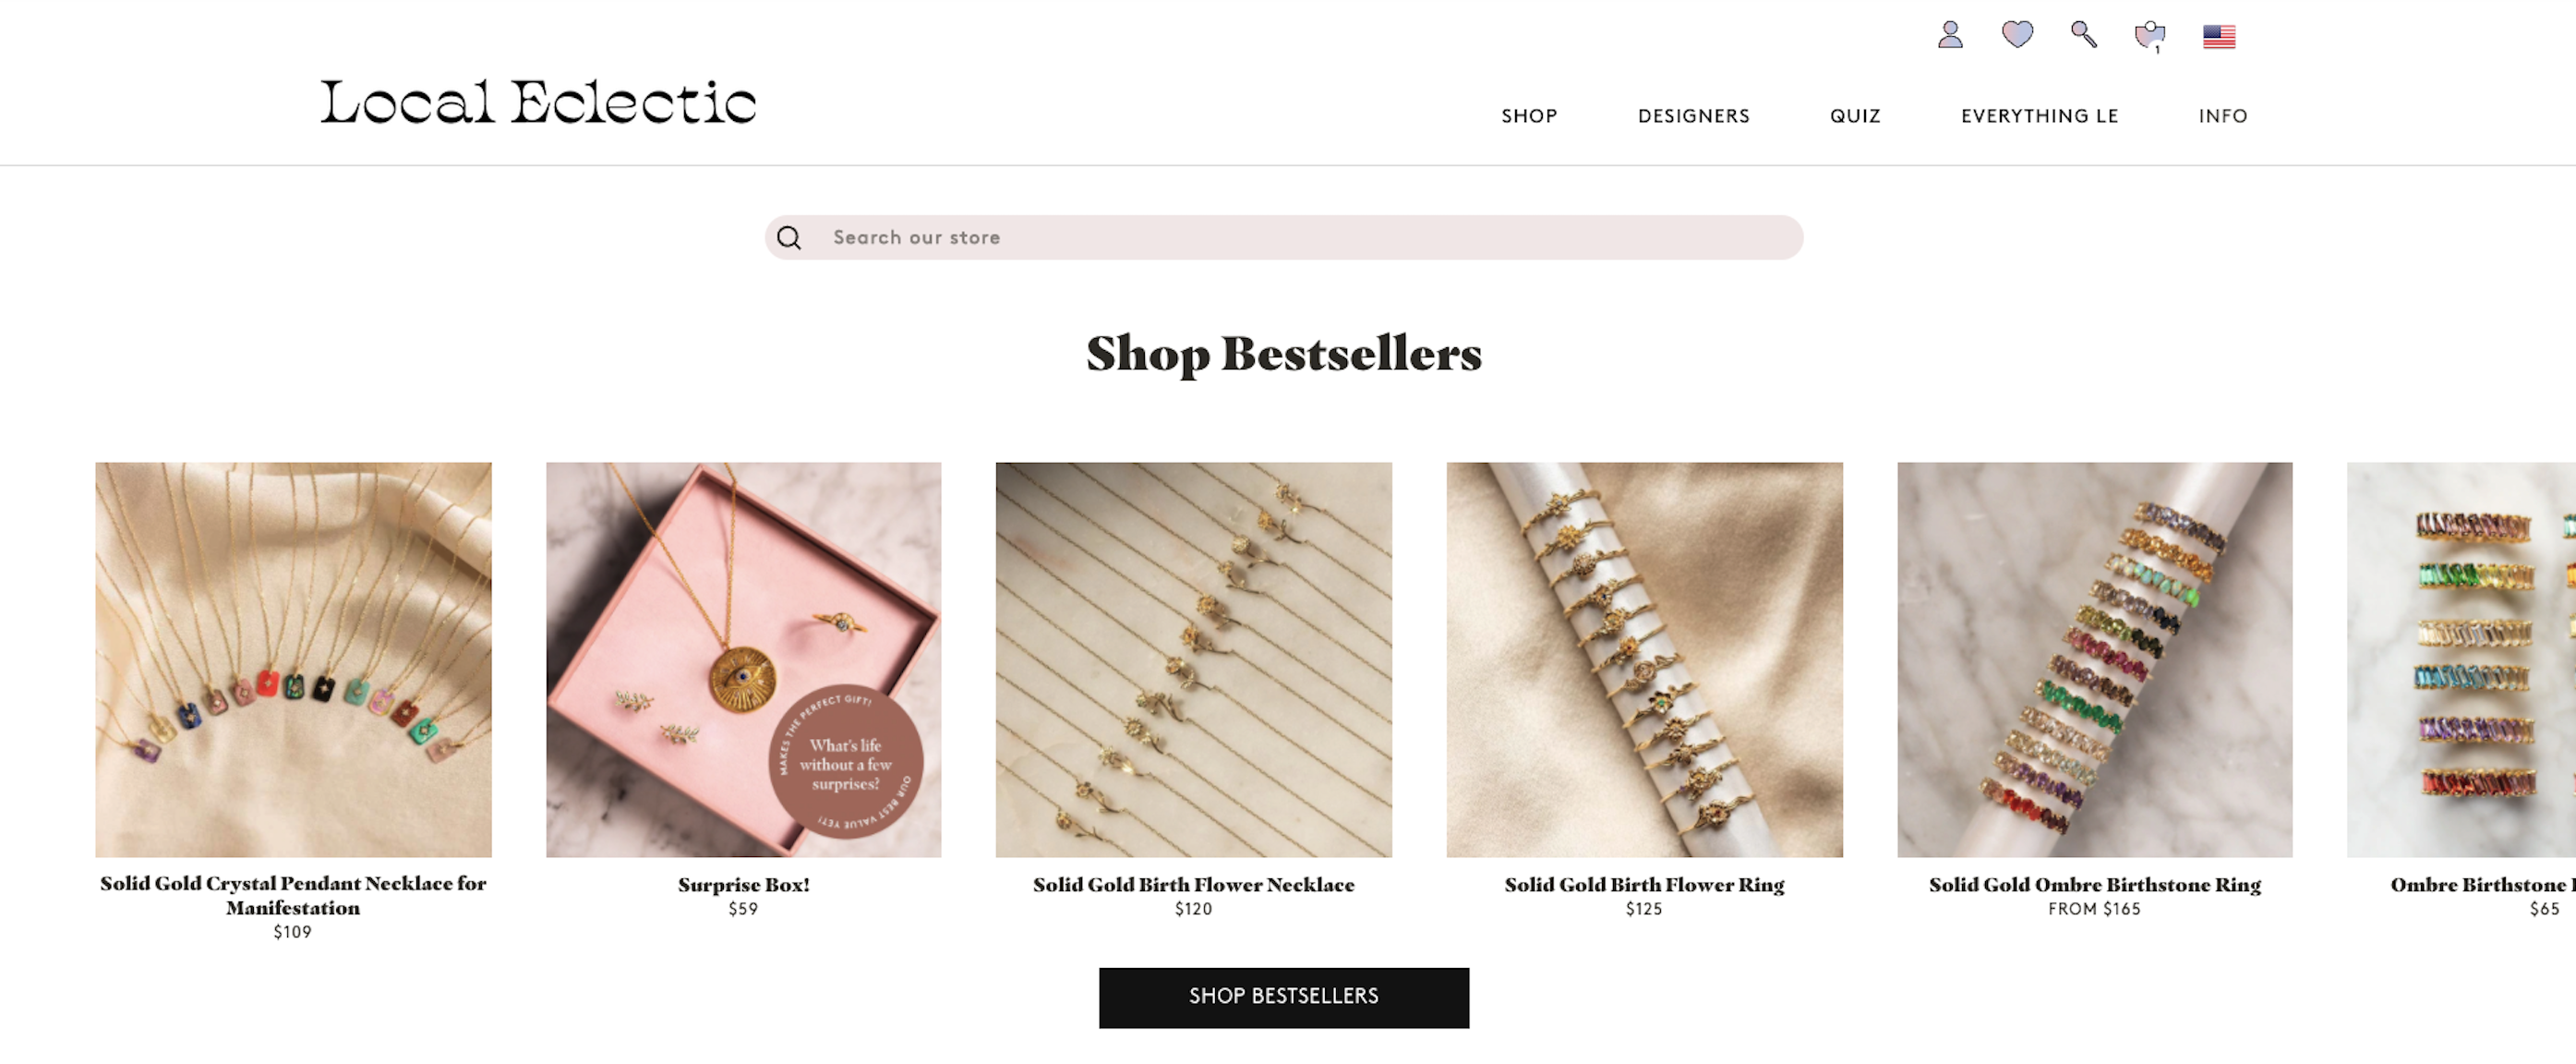 Local Eclectic Shop Bestsellers on the homepage